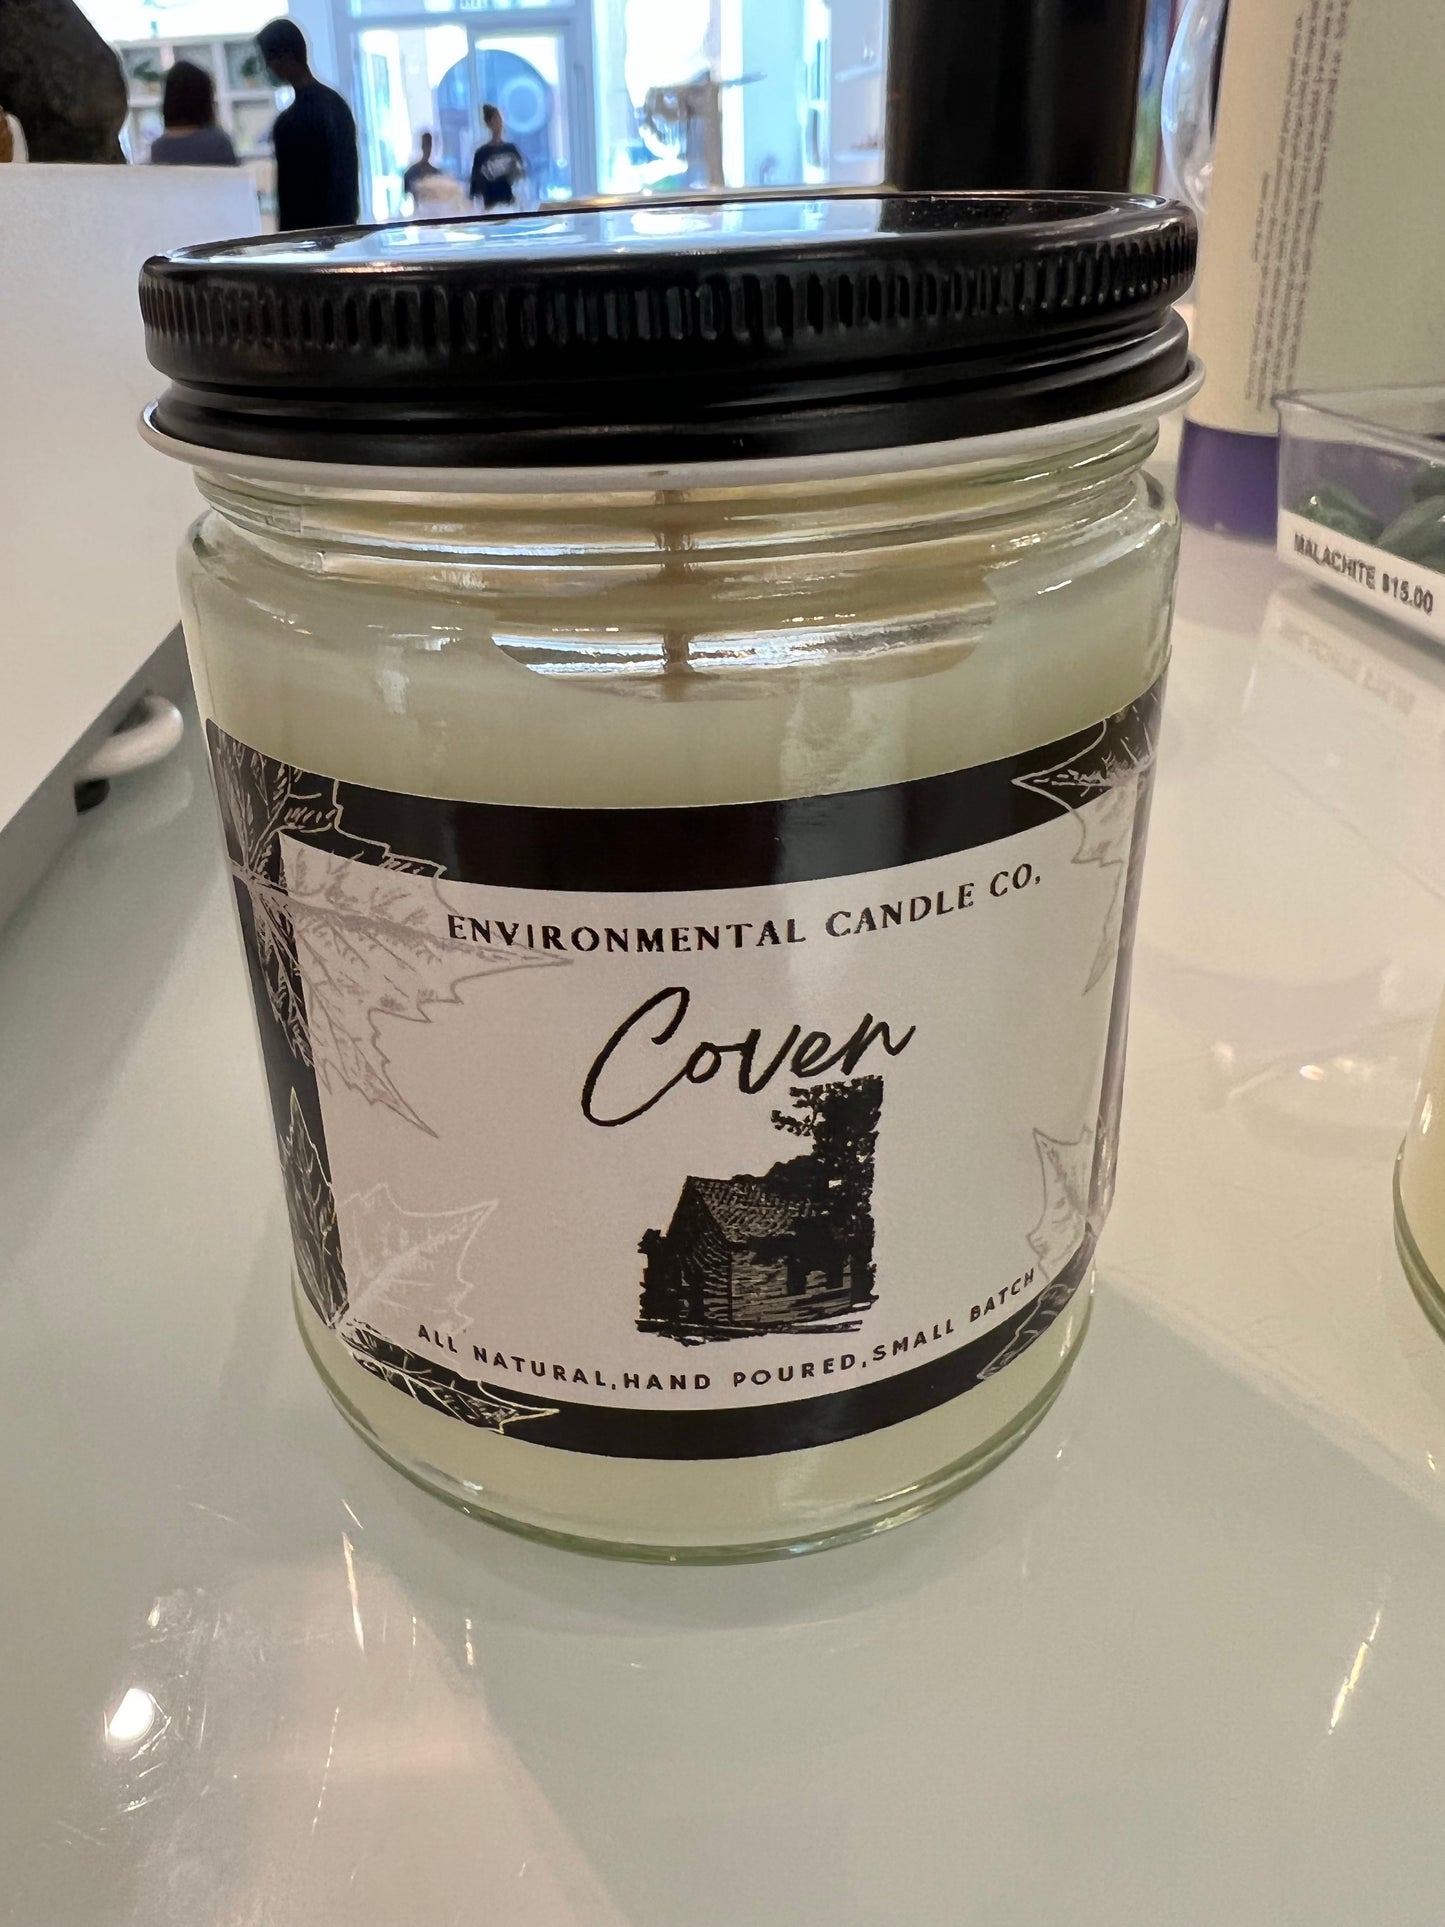 Environmental Candle Co. - Coven